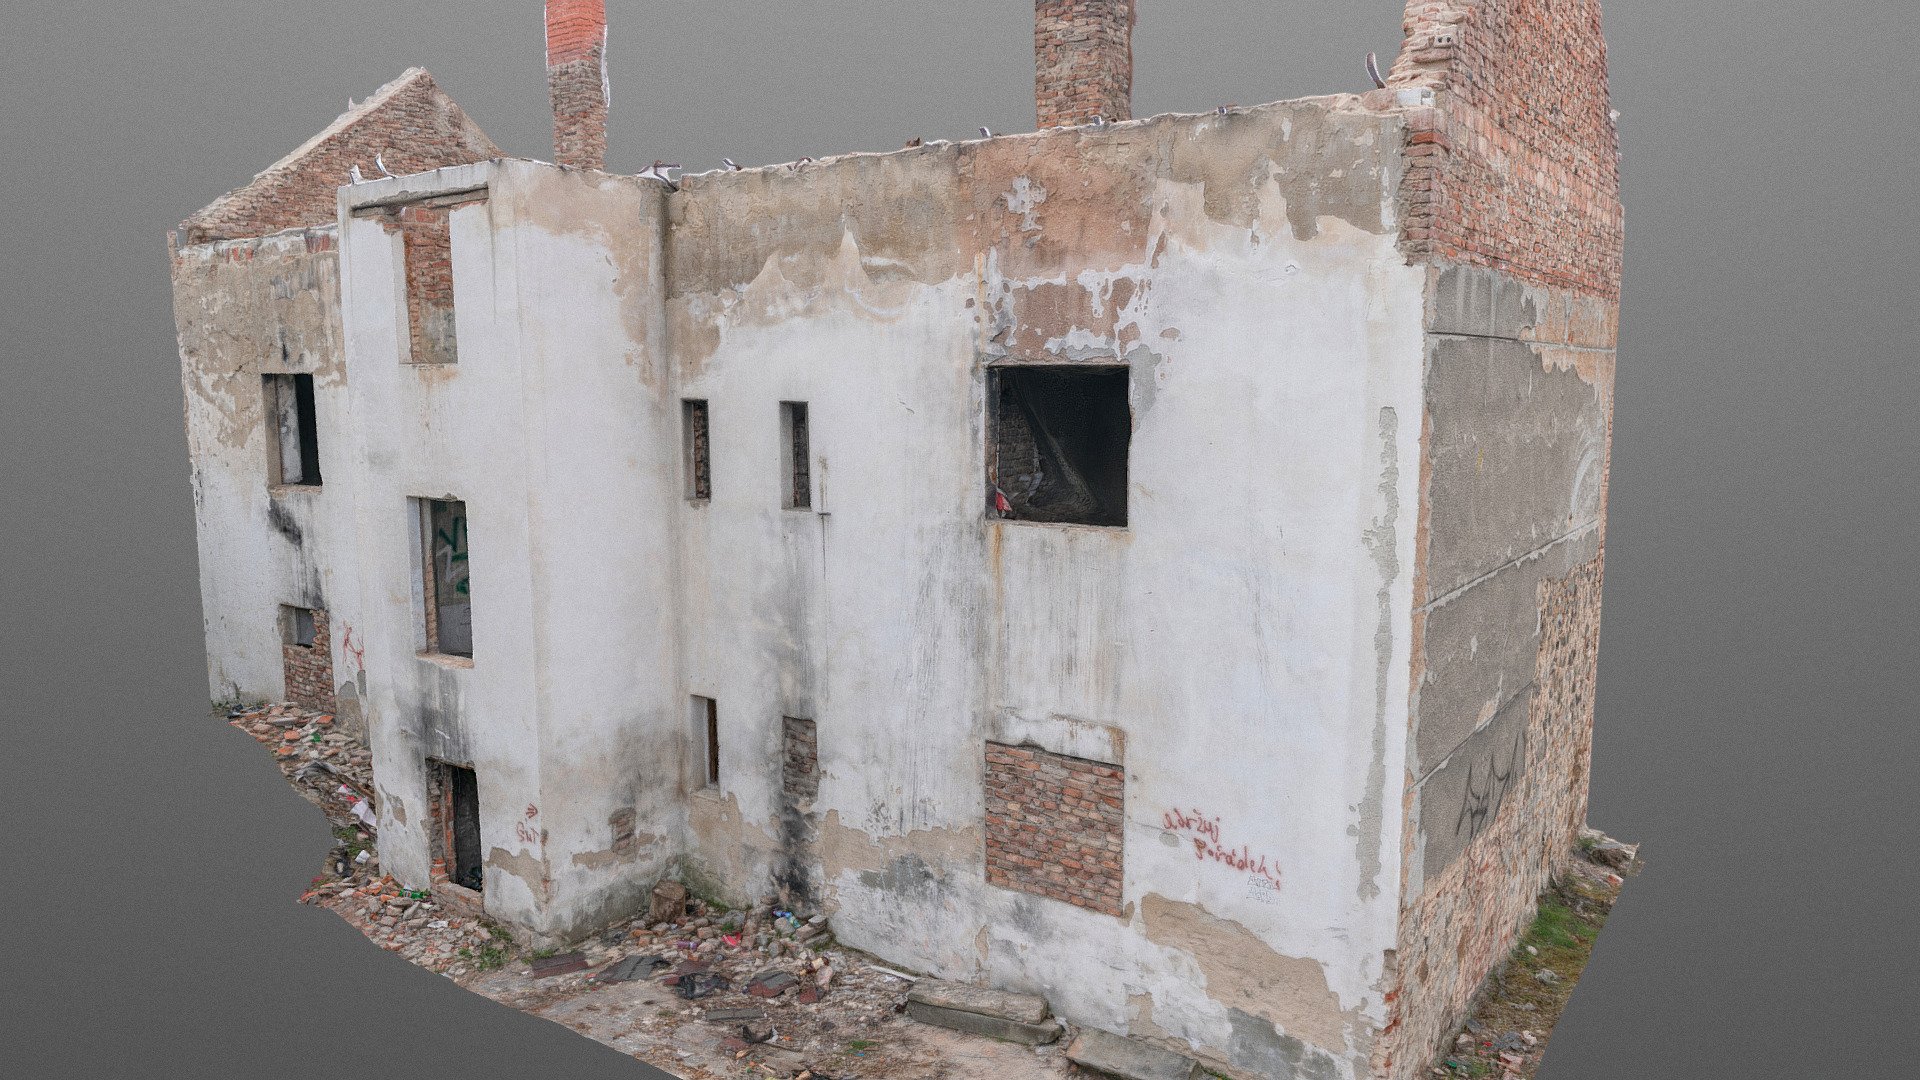 20th century  ruined roofless derelict abandoned house scene 3D model

photogrammetry scan (350x36MP), 6x8K texture +HD normals (as additional .zip) - contact me for source photos or re-exports

sadly in no-fly zone, so couldn't get drone pics - Roofless house ruin - Buy Royalty Free 3D model by matousekfoto 3d model